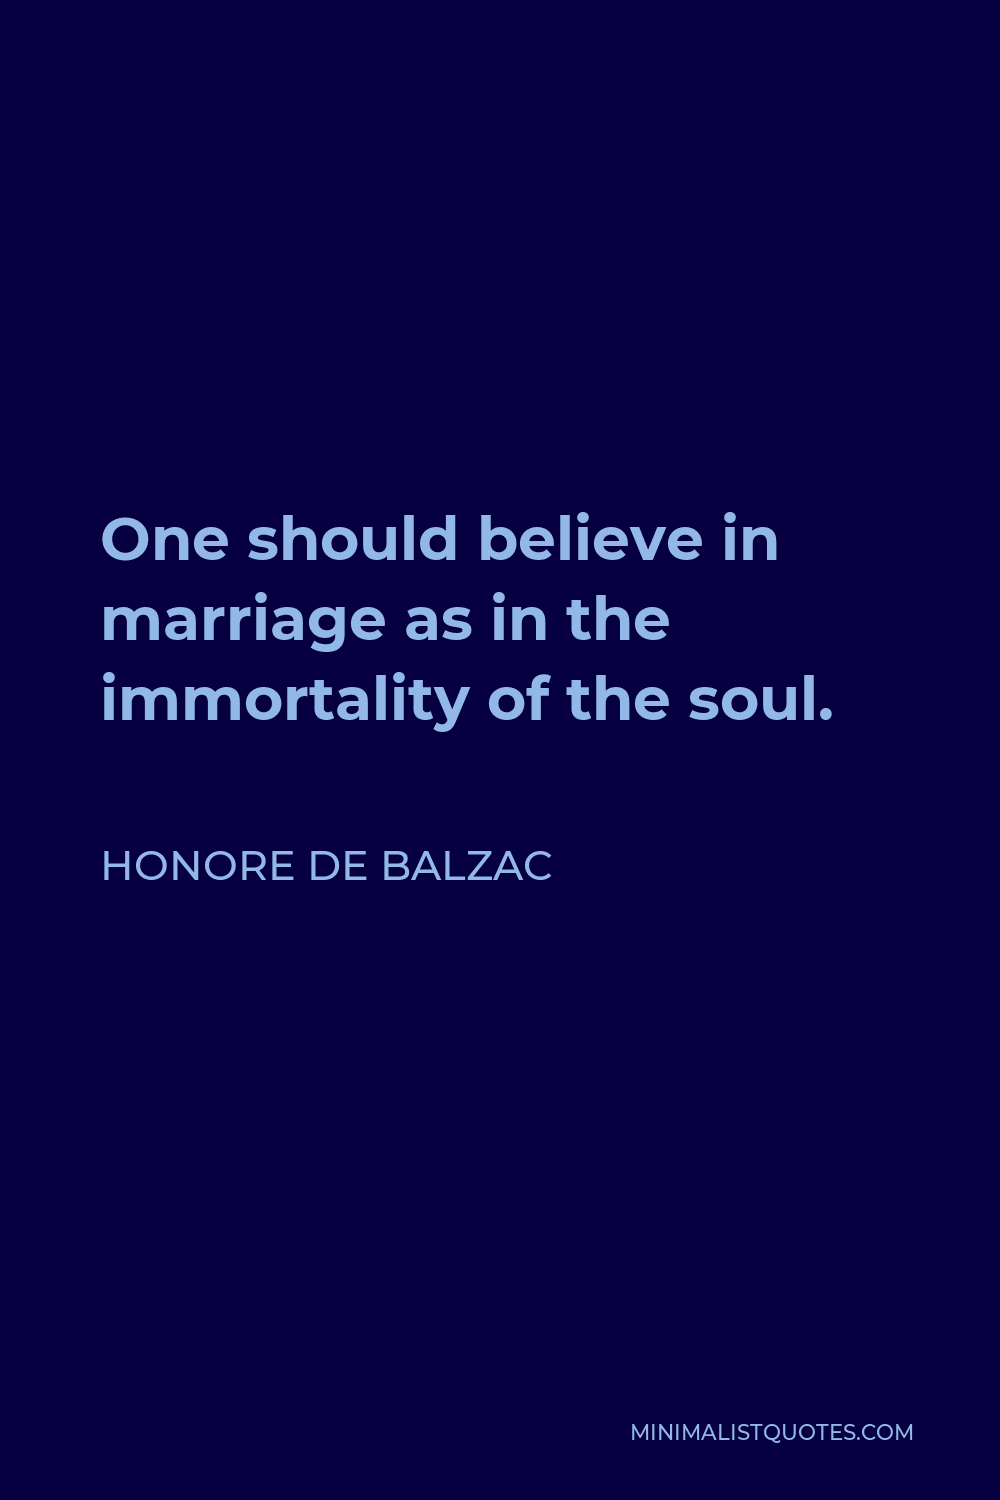 Honore de Balzac Quote - One should believe in marriage as in the immortality of the soul.